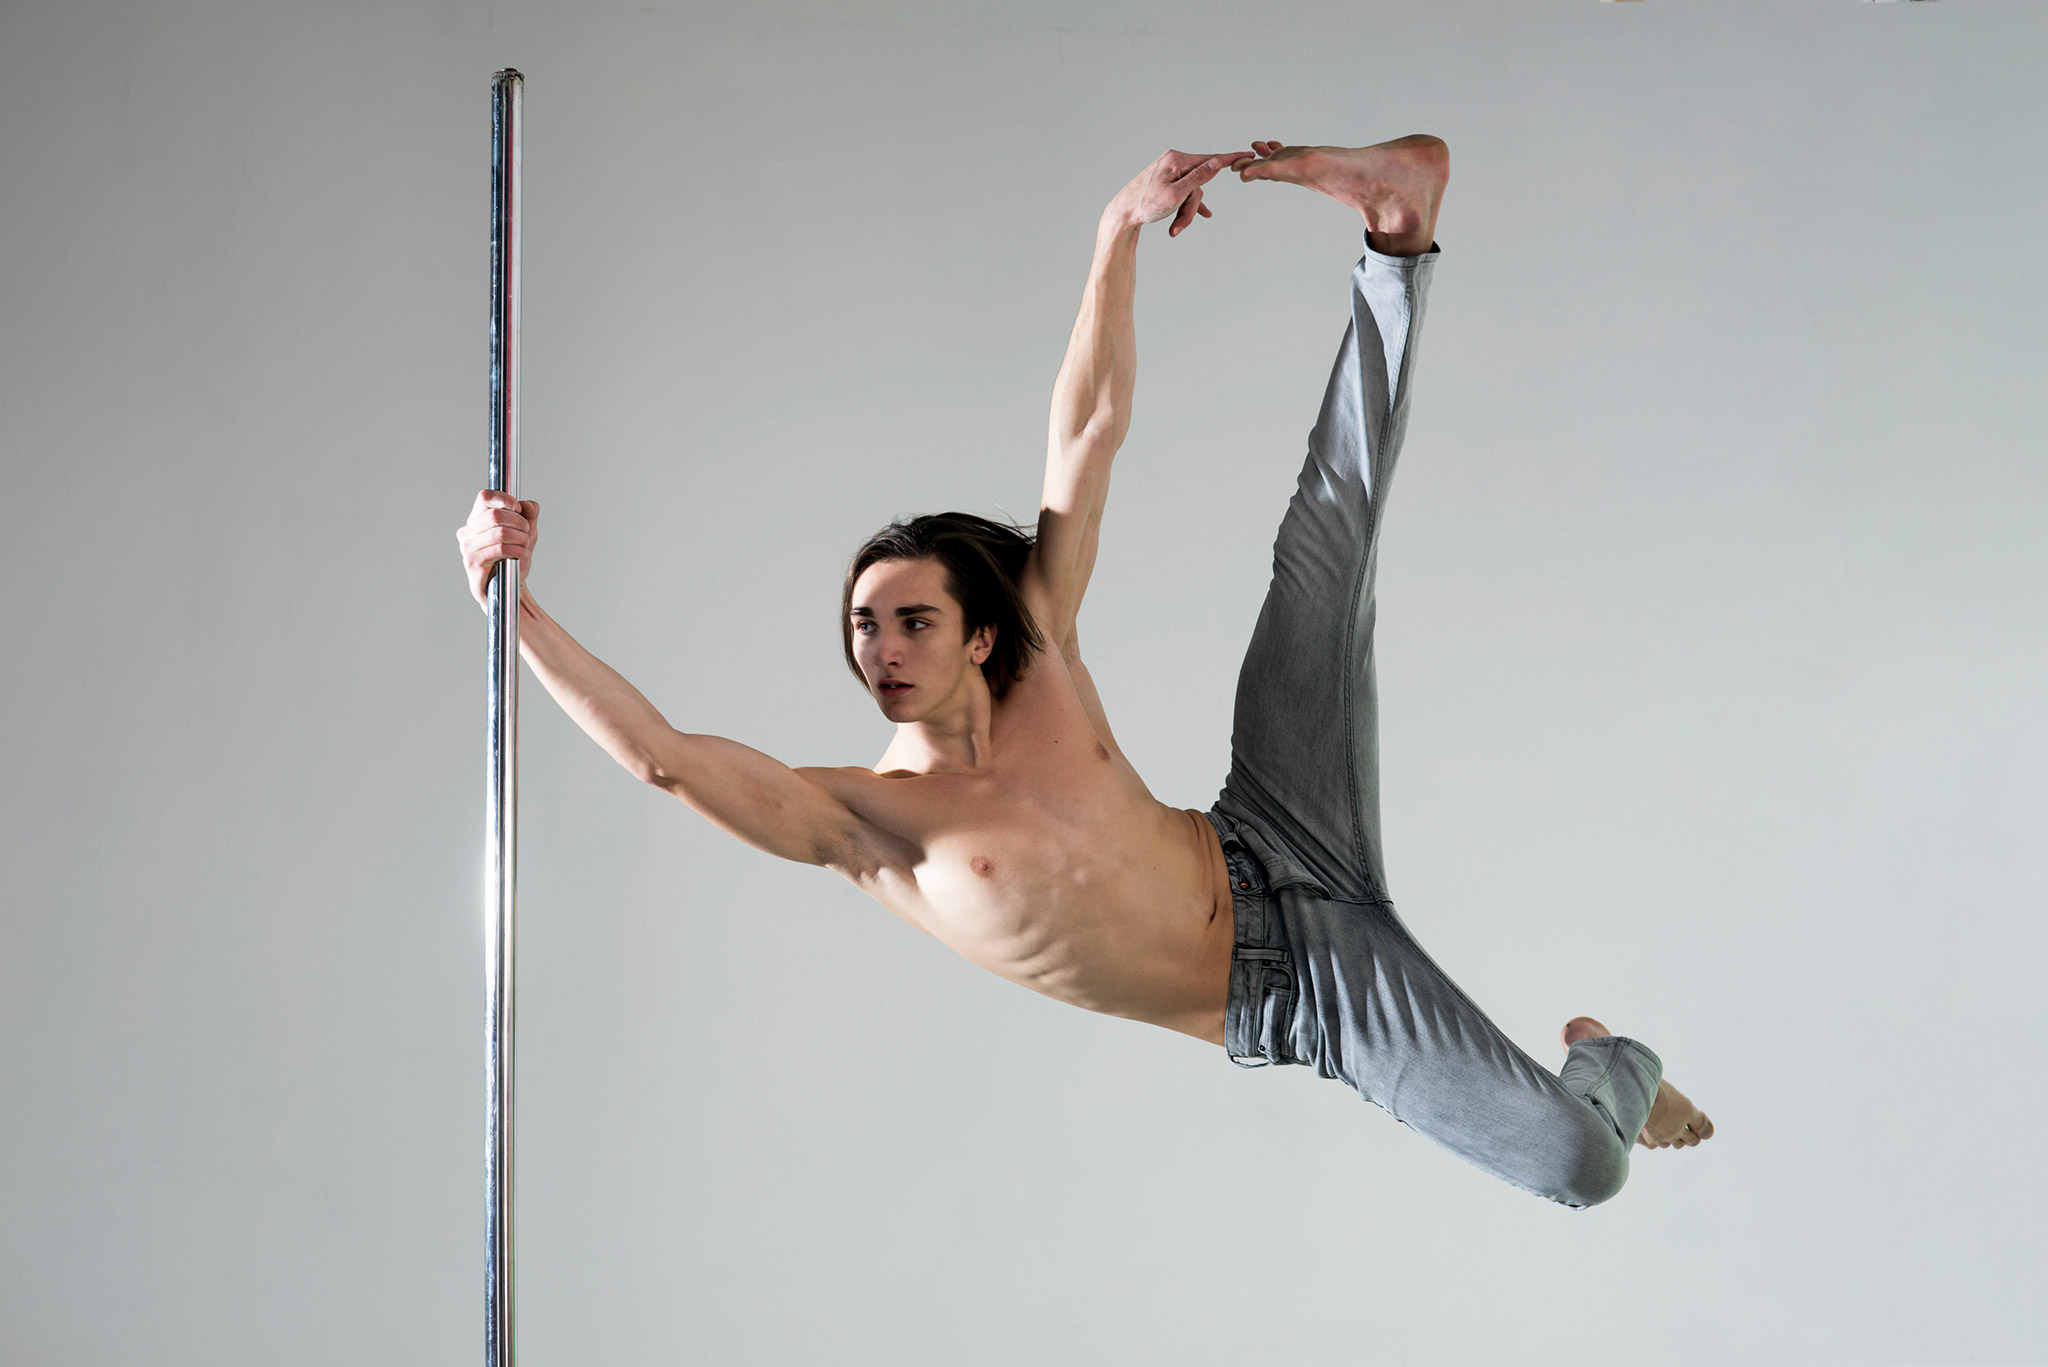 How to structure your training to get better at pole dancing